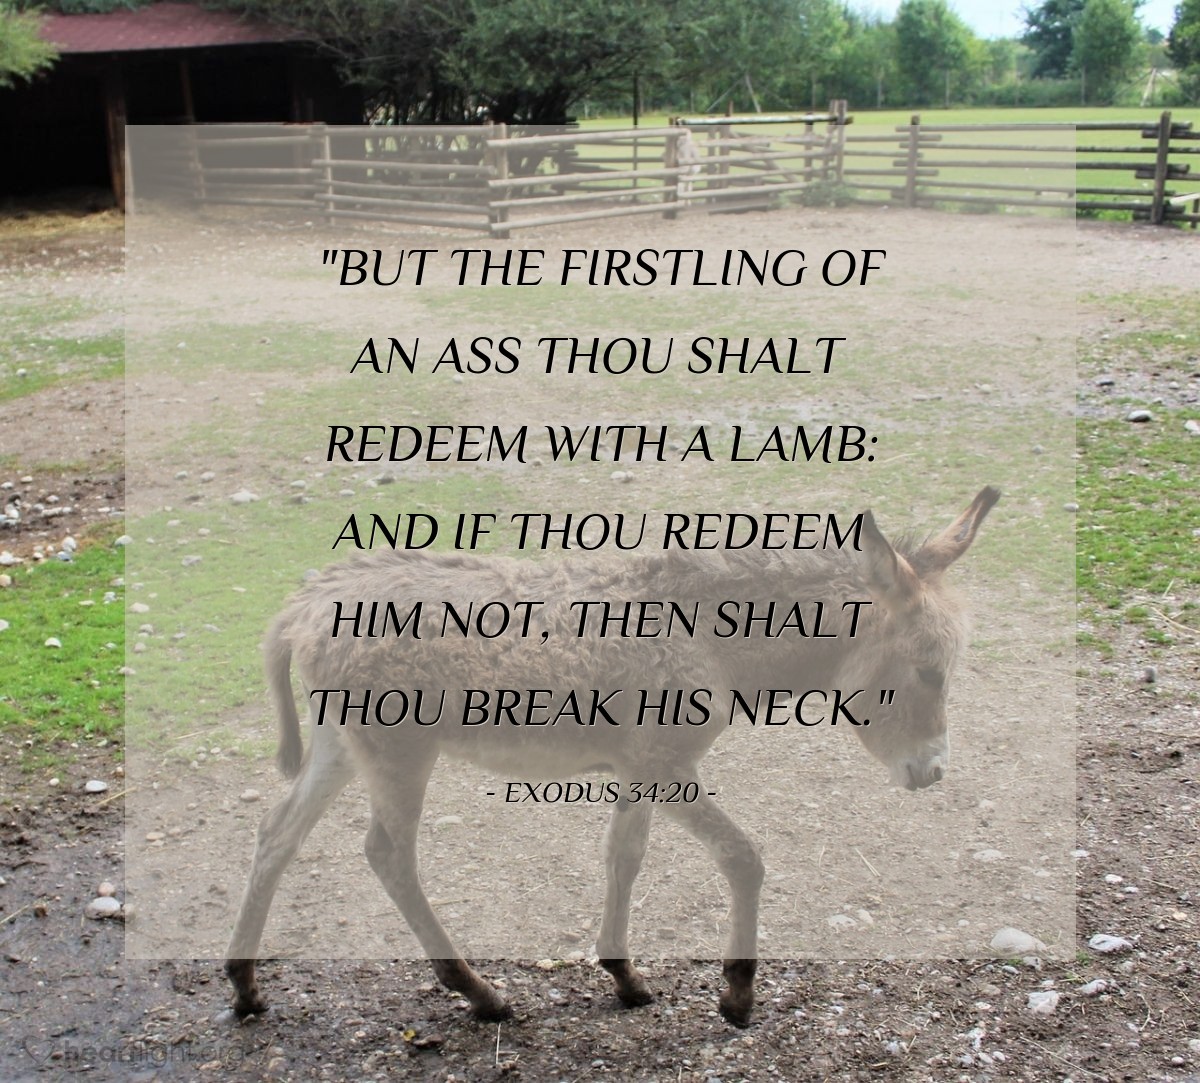 Illustration of Exodus 34:20 — "But the firstling of an ass thou shalt redeem with a lamb: and if thou redeem him not, then shalt thou break his neck."